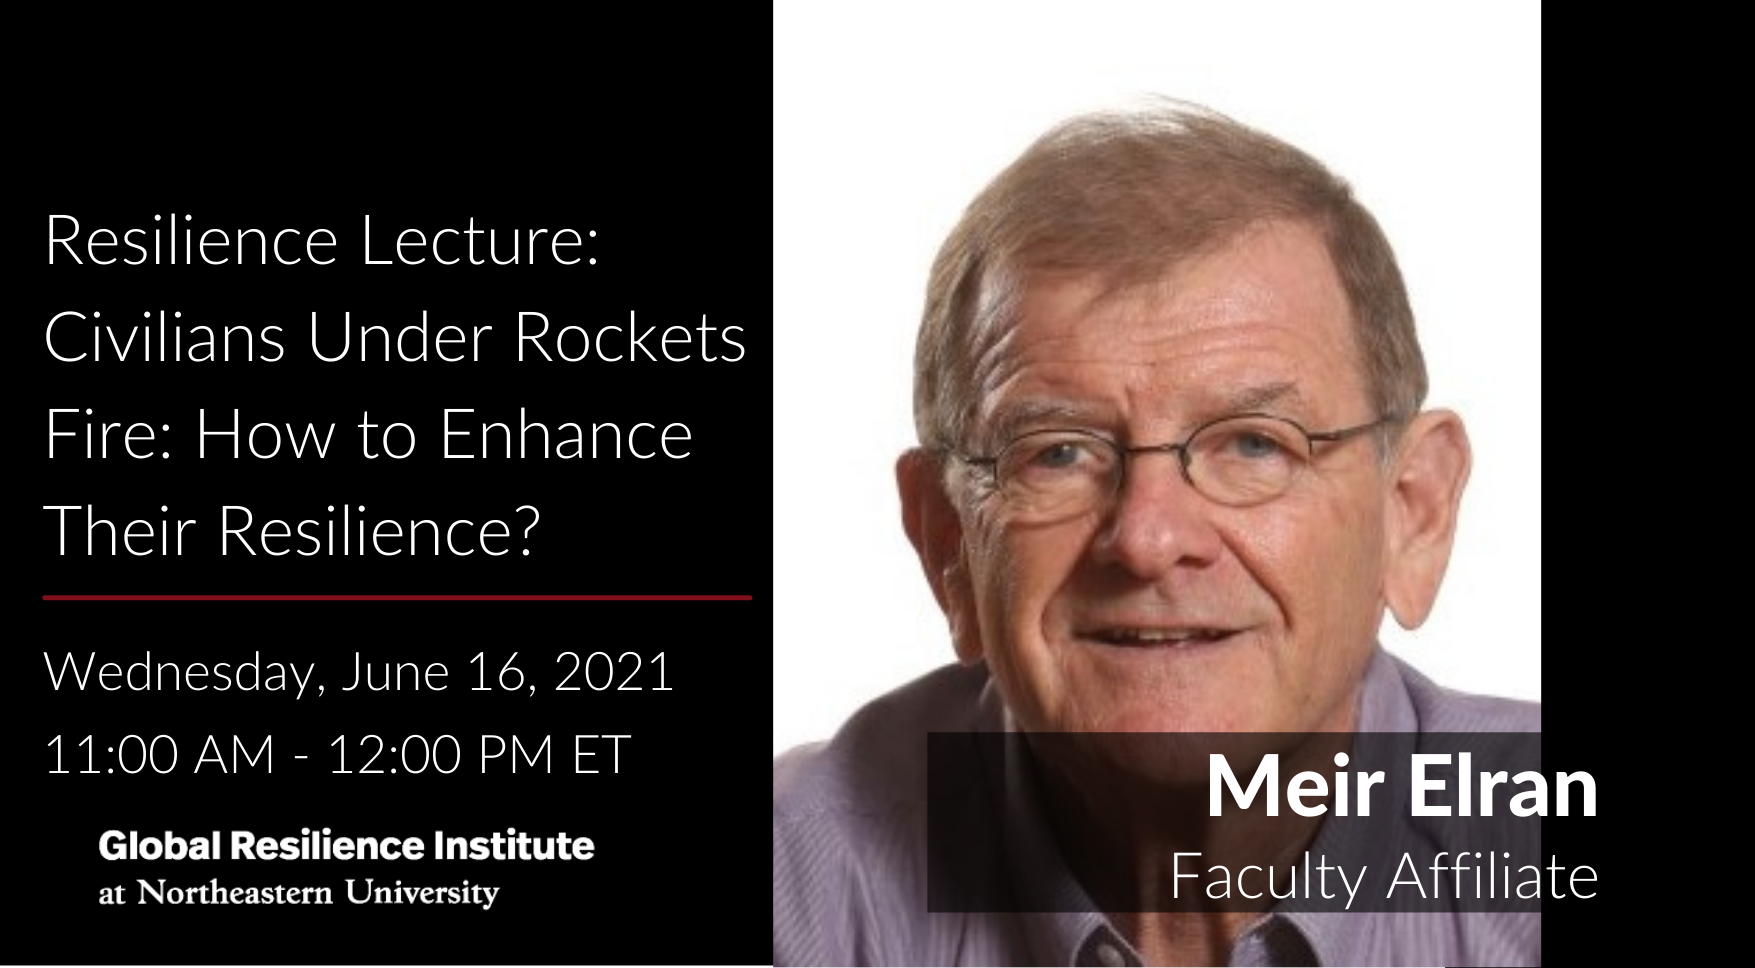 Resilience Lecture: Civilians Under Rockets Fire: How to Enhance Their Resilience?